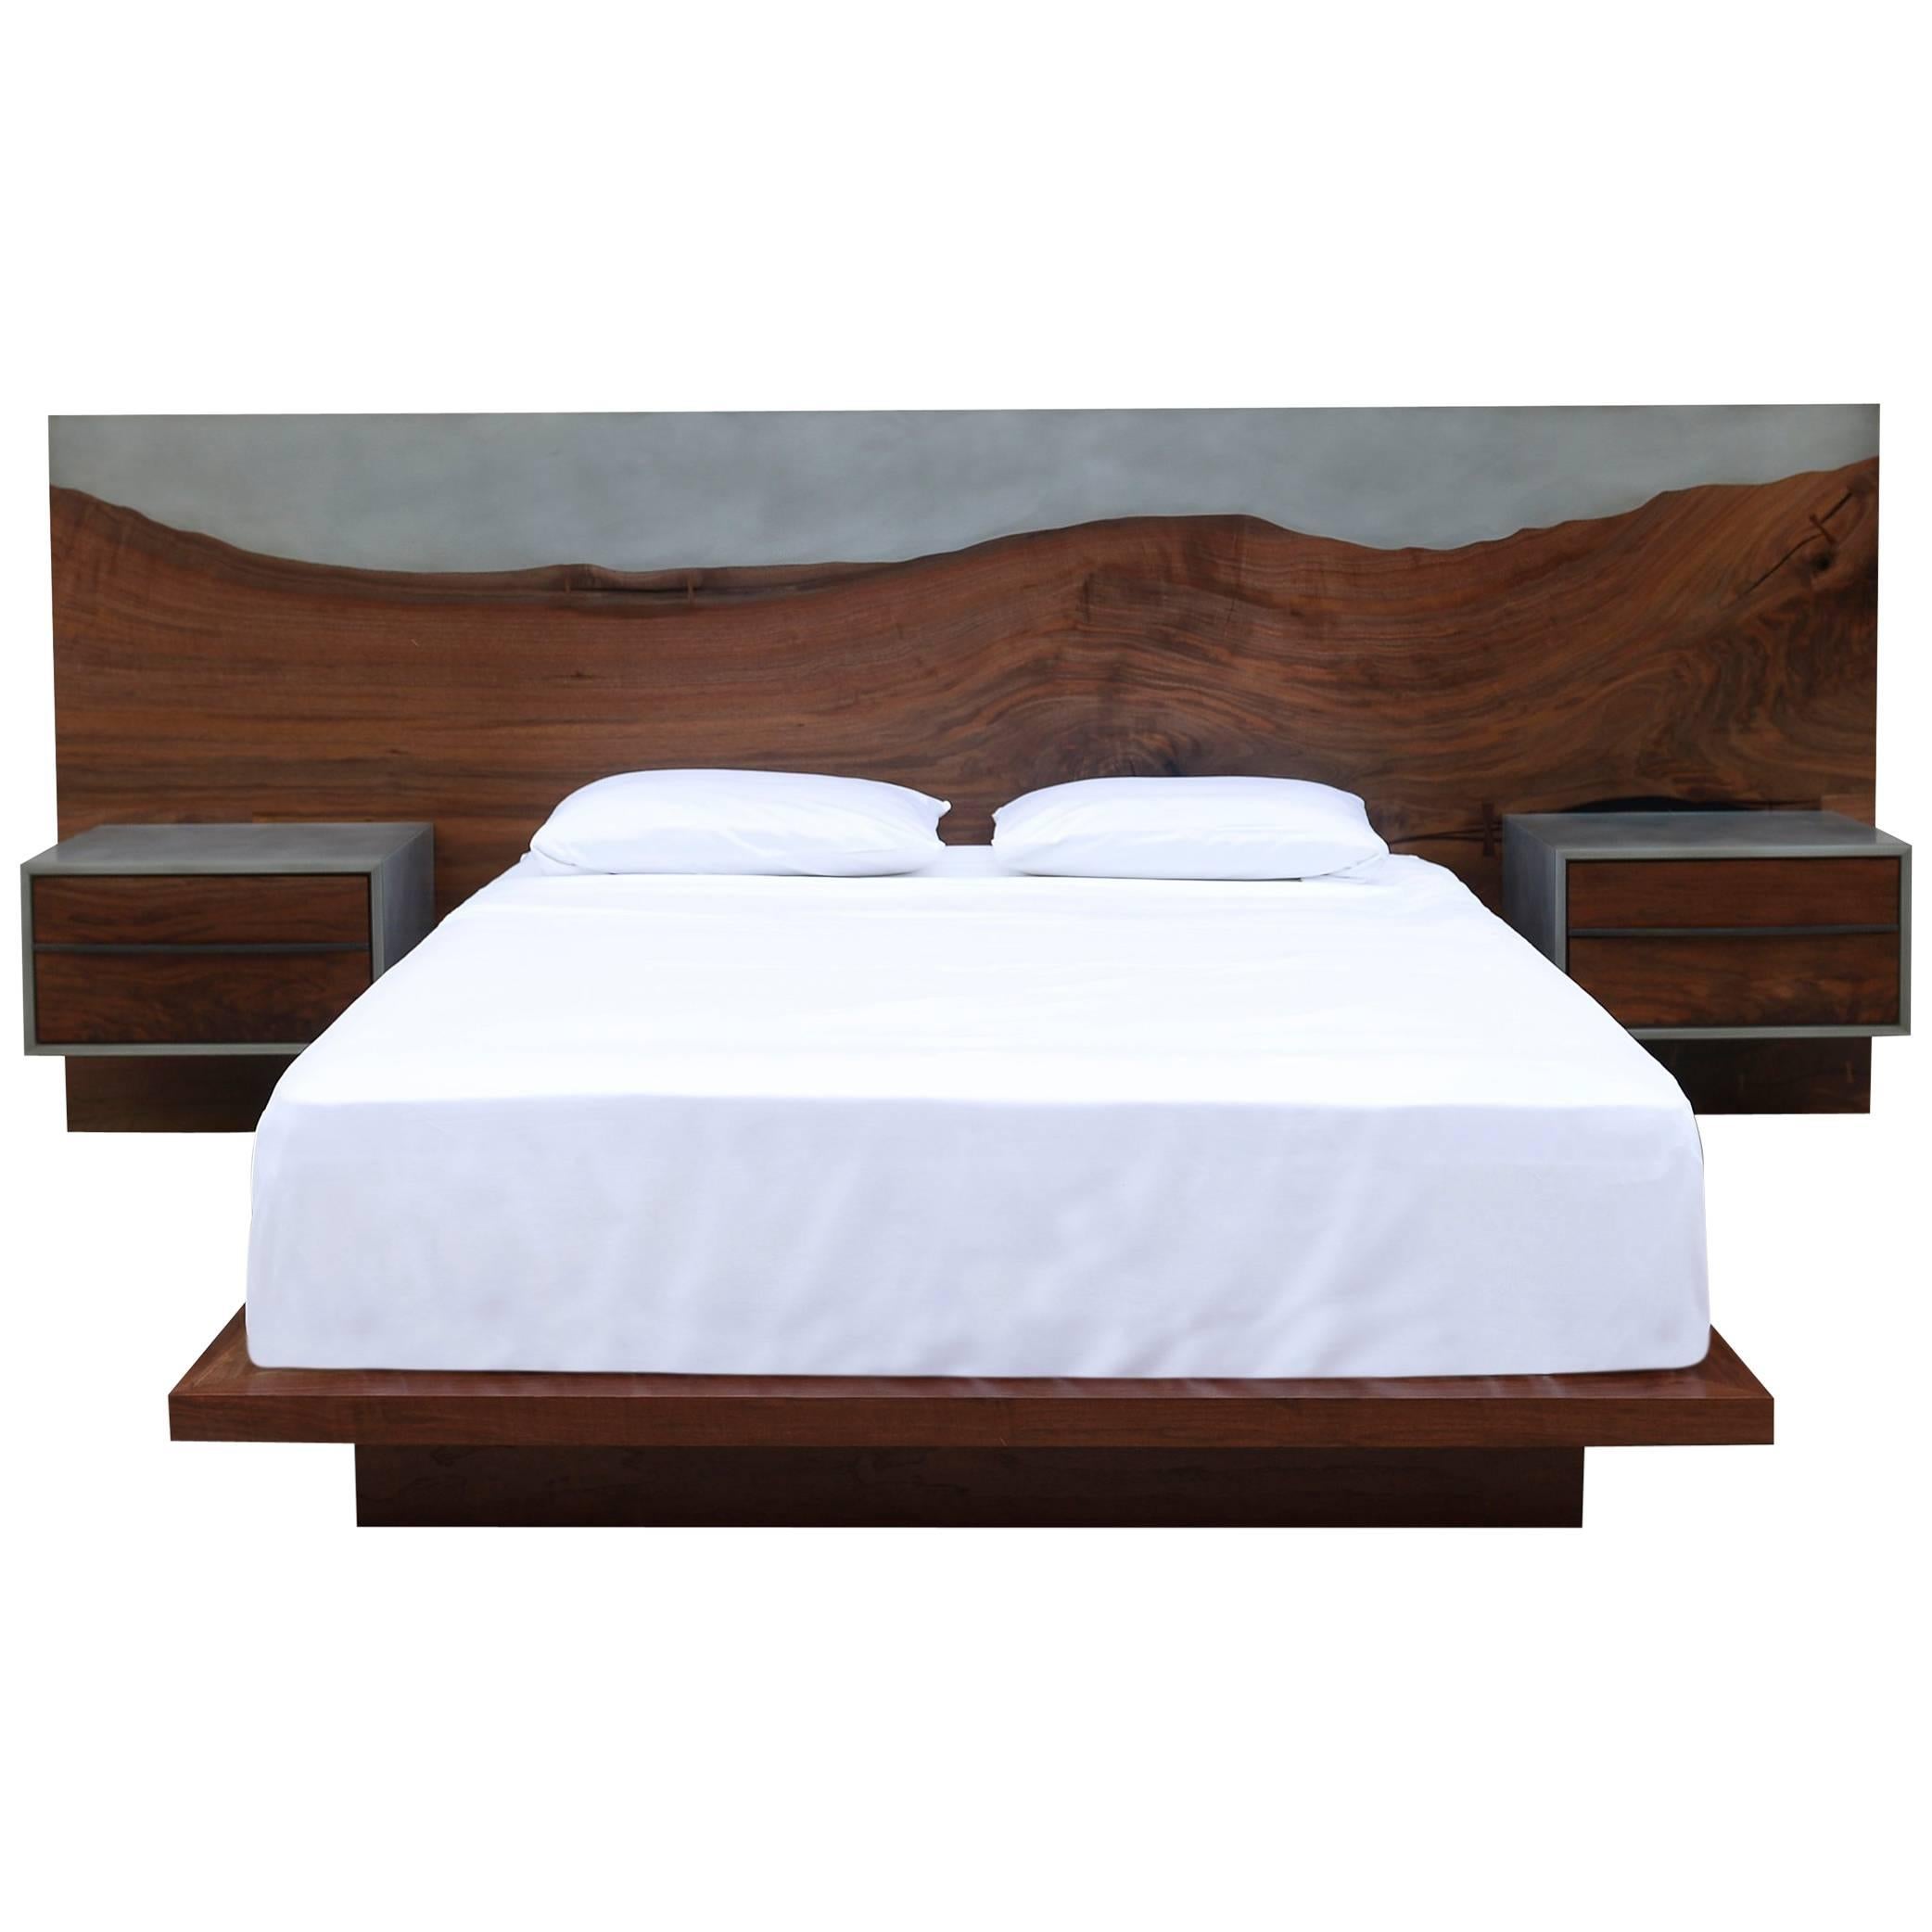 Nola Bed, Customizable Wood, Metal and Resin, Queen Size For Sale